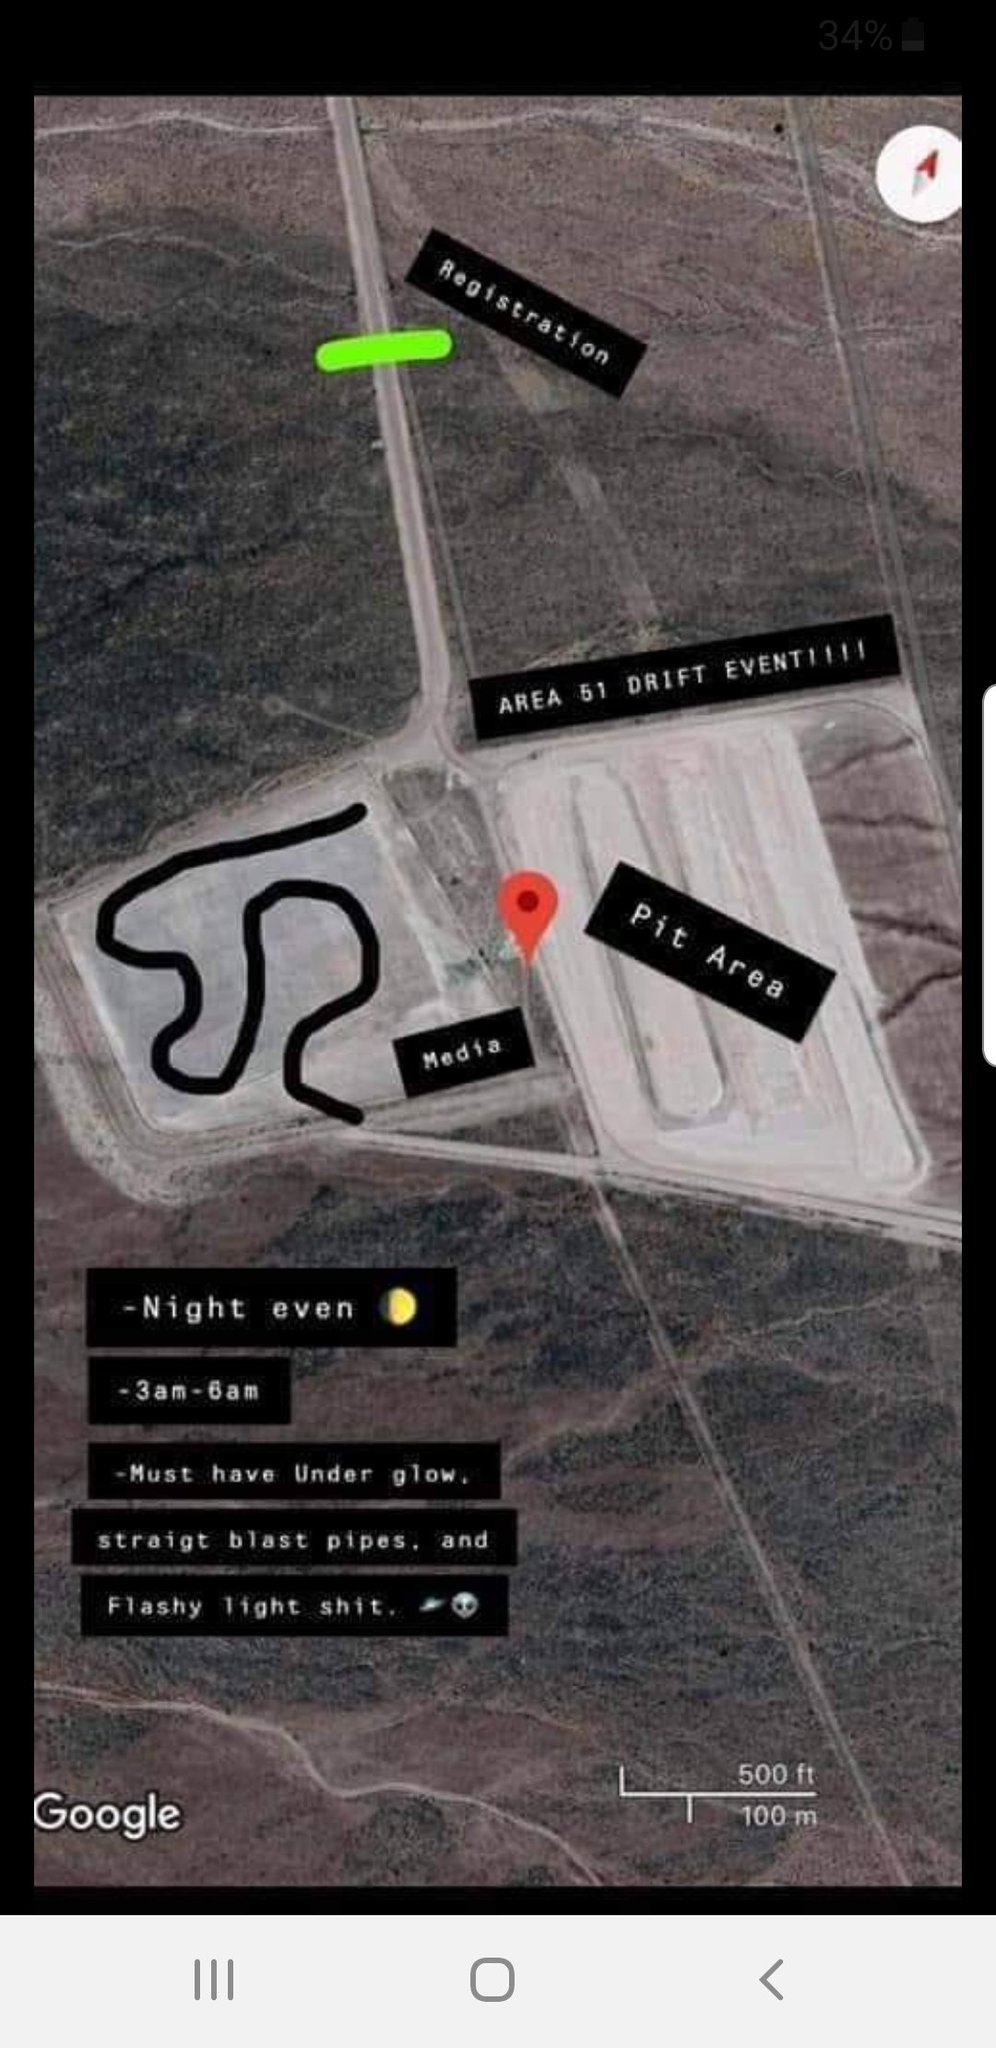 Area 51 Drift Event!! Who's gonna be there? - meme